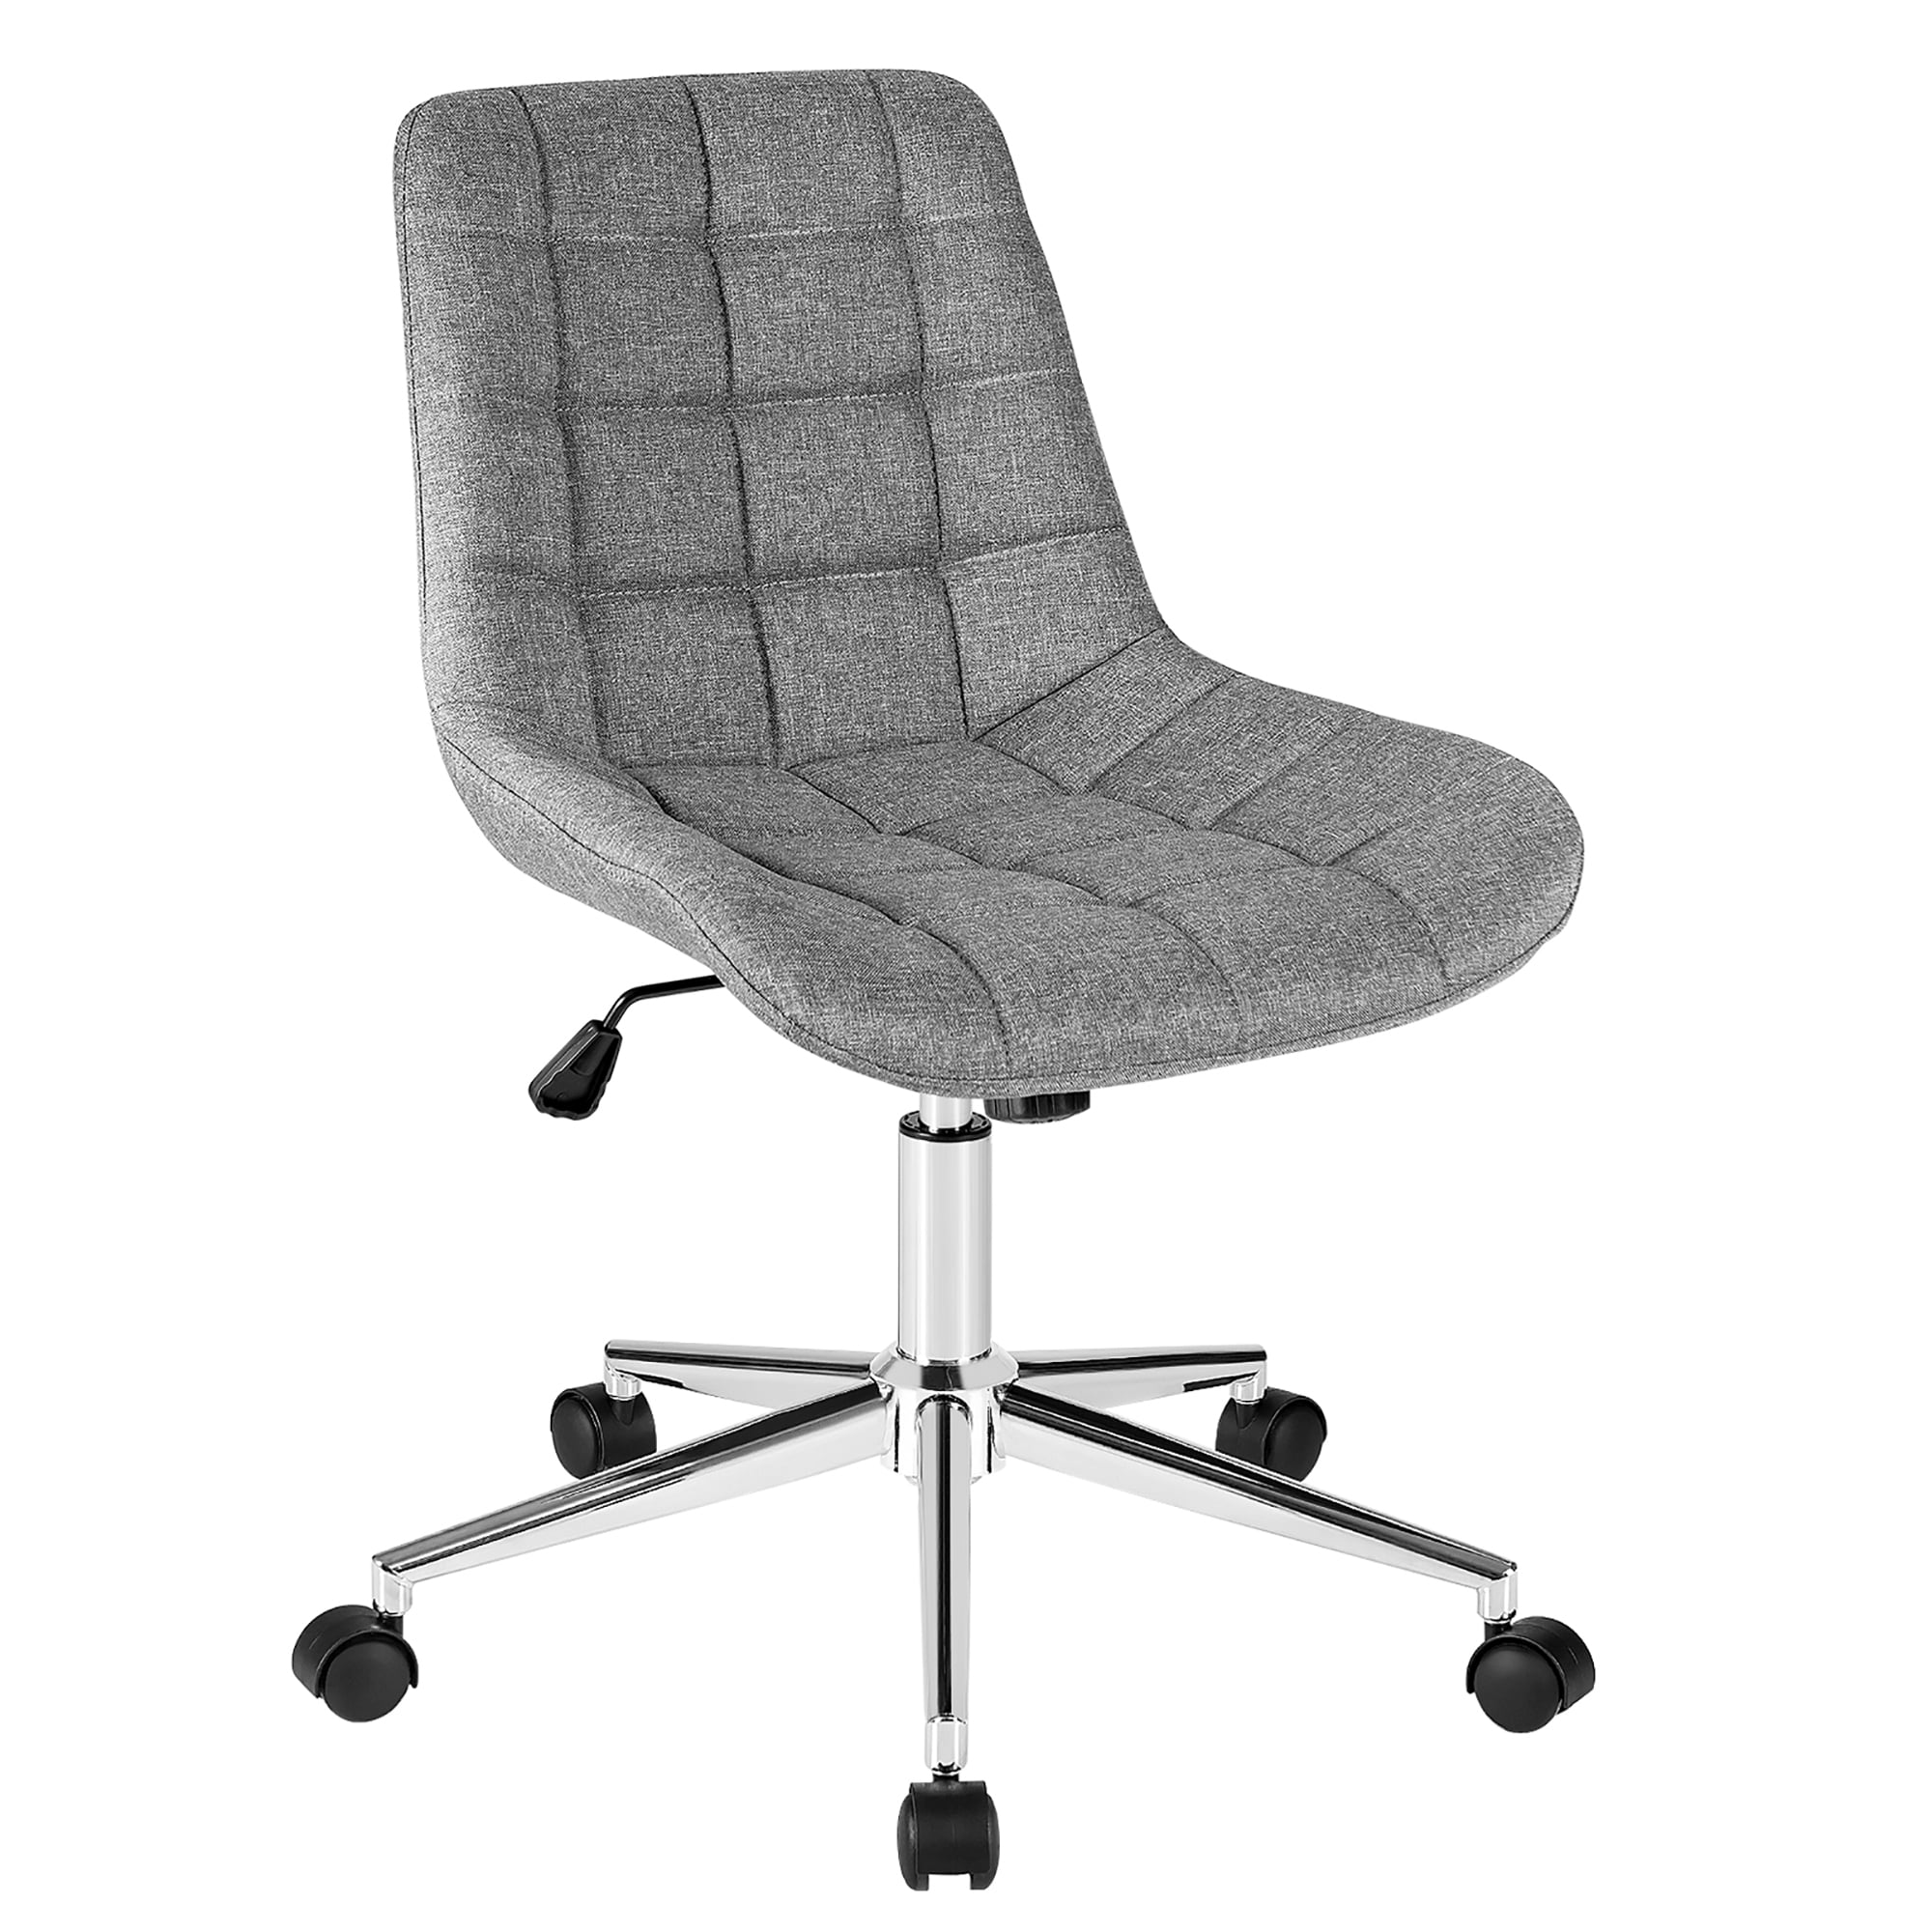 Iron Support Back Black Giantex Office Chair Mesh Mid Back Computer Desk Chair Height Adjustable Ergonomic Modern Swivel Task Chair Swivel Armless Chair with Breathable Cushion 